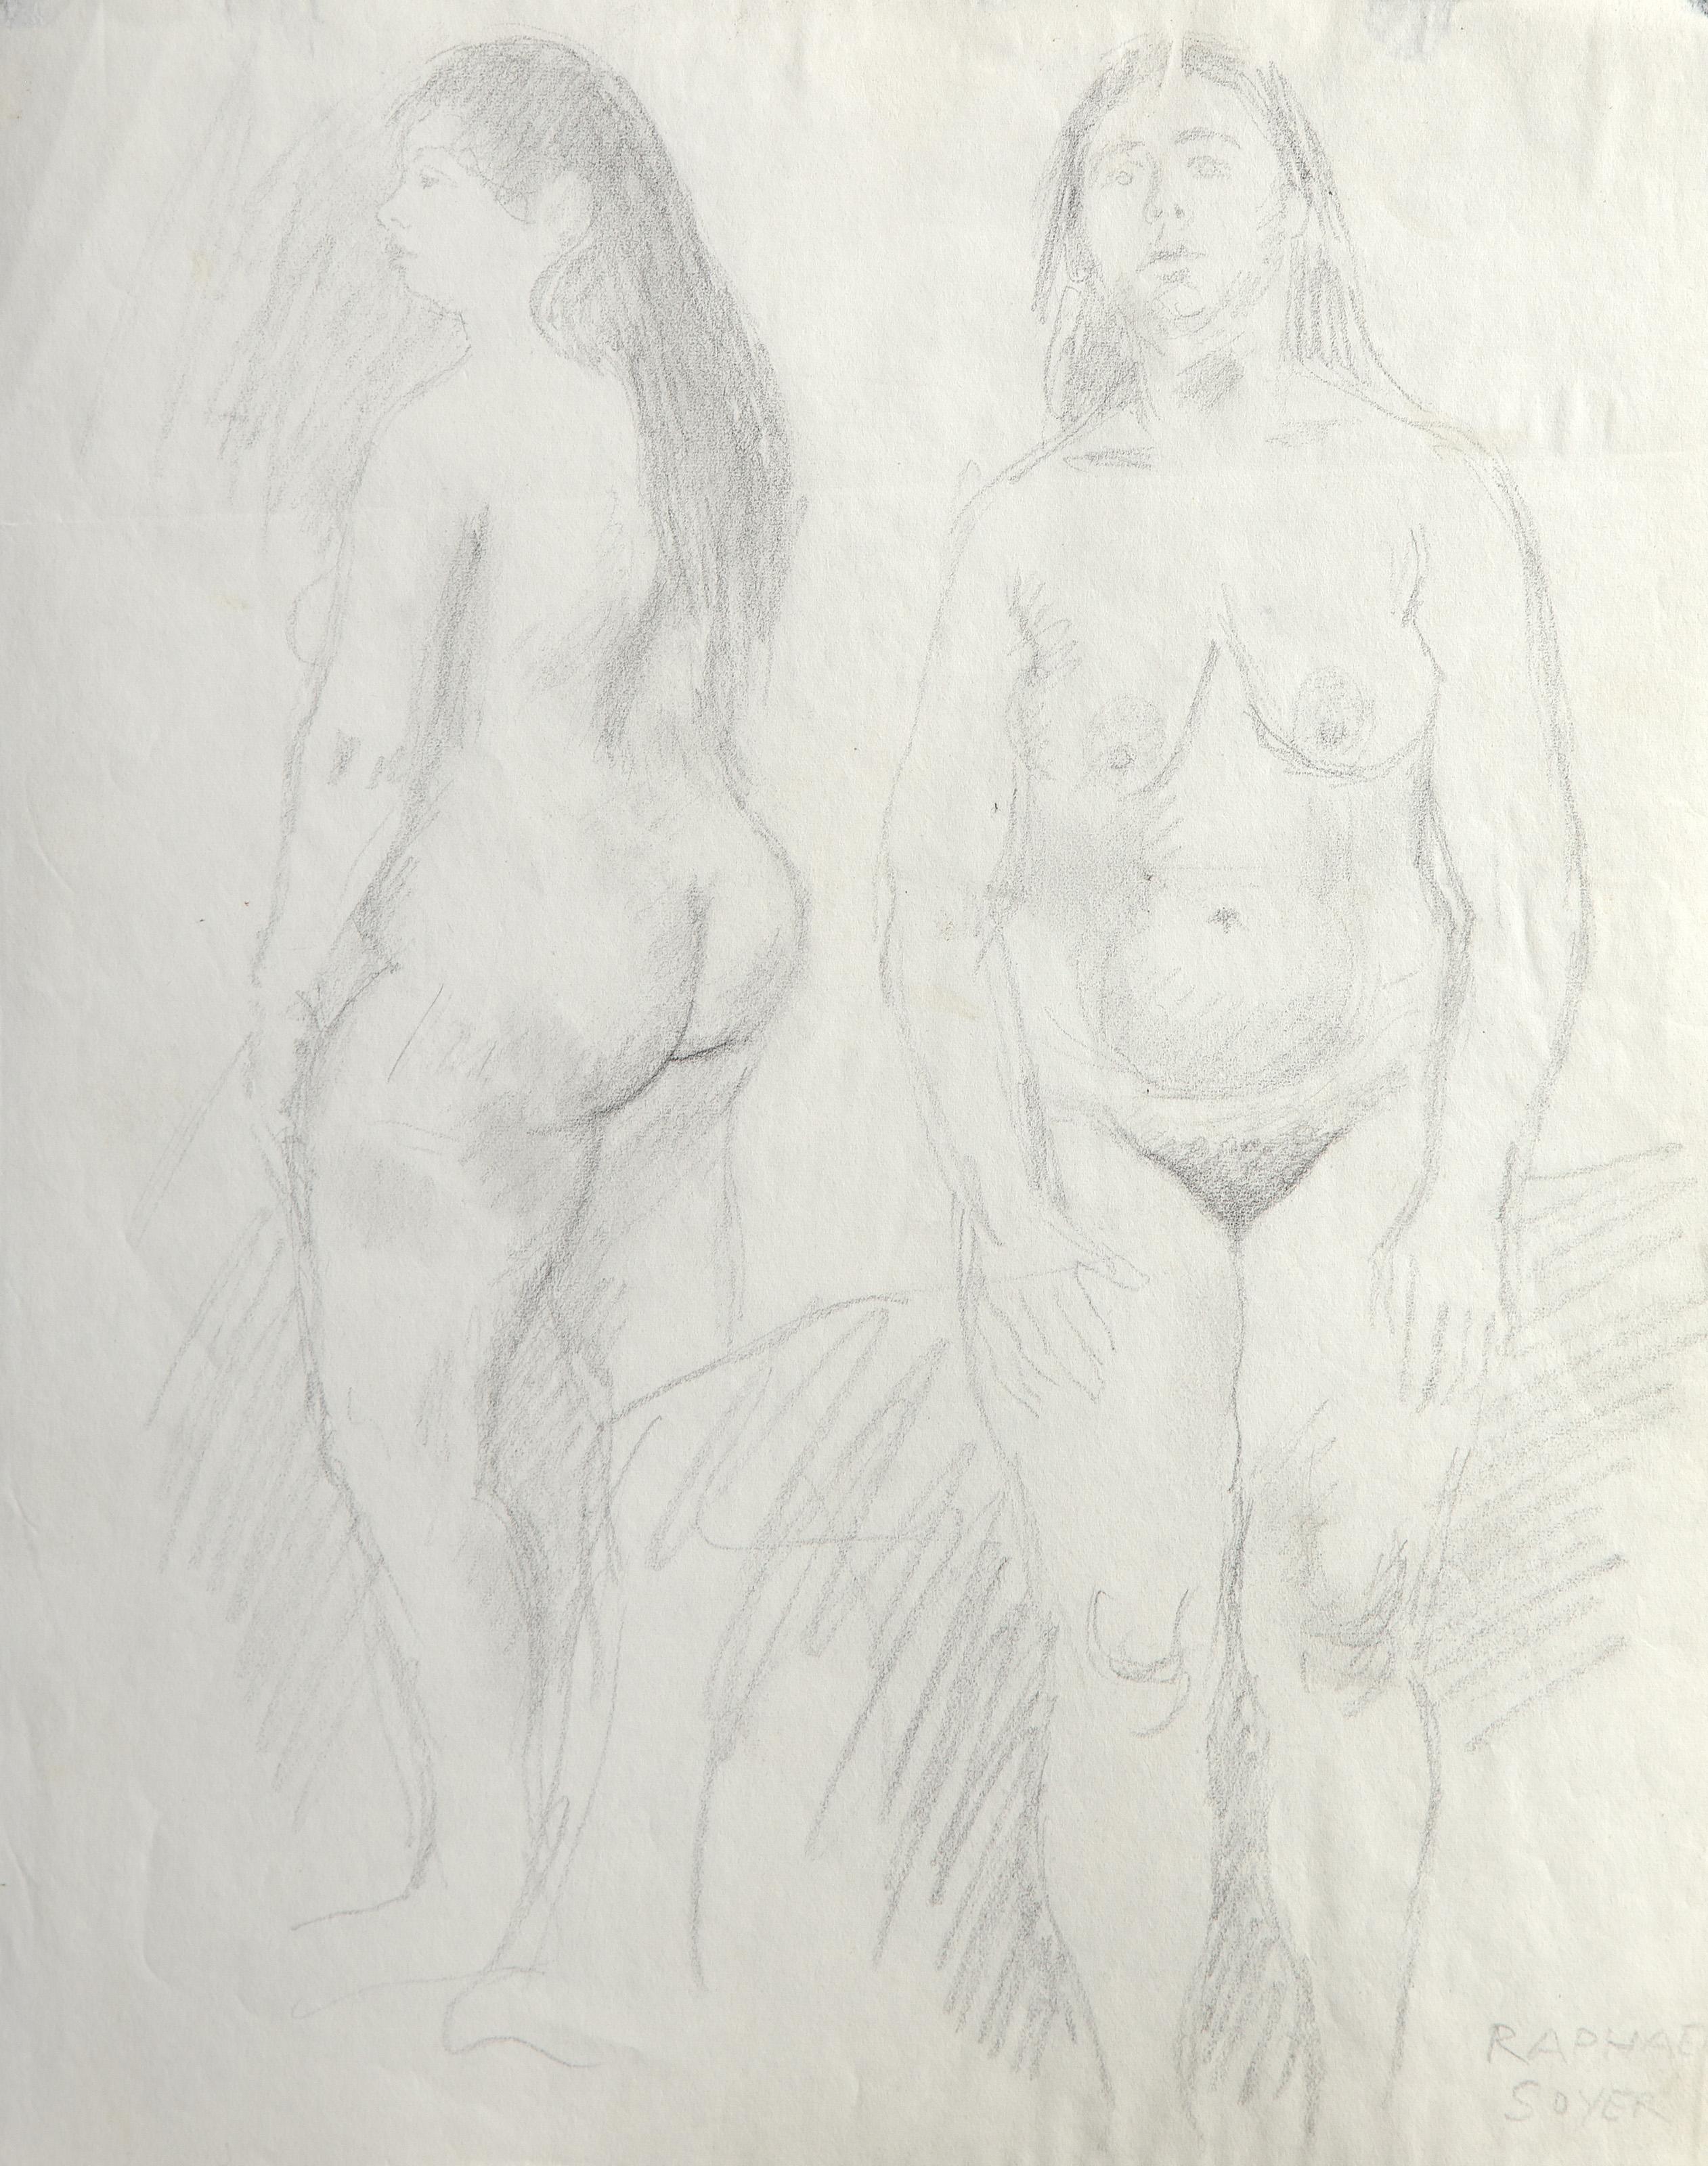 Raphael Soyer, Russian/American (1899 - 1987) -  Nude Study. Medium: Graphite on Paper, signed in pencil lower right, Size: 12.5 x 10 in. (31.75 x 25.4 cm) 